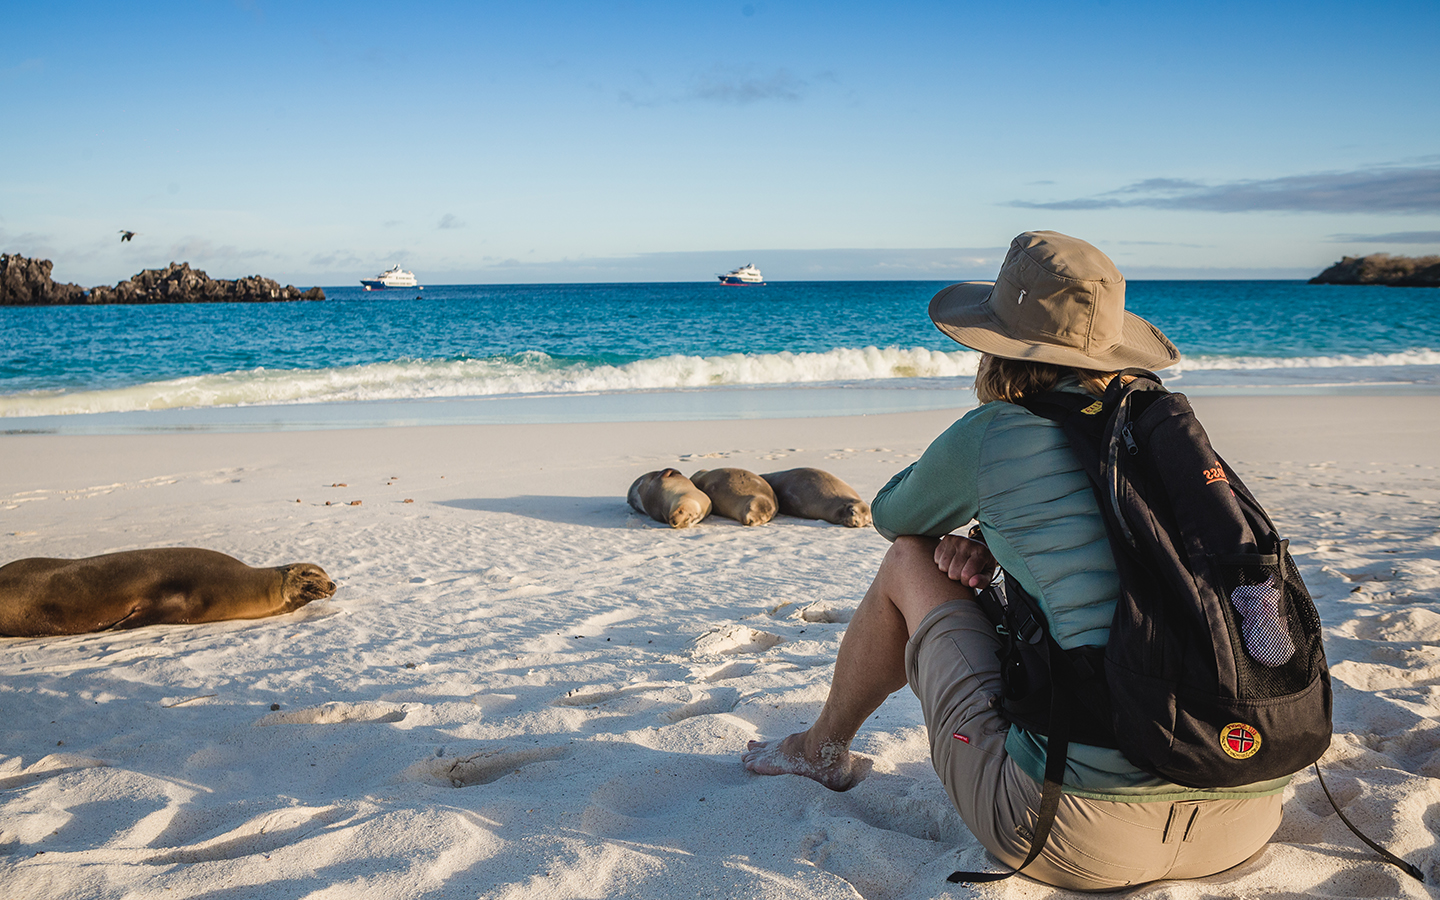 A female traveler with her back to camera wears a backpack and hat sitting on a white sand beach looking at sea lions